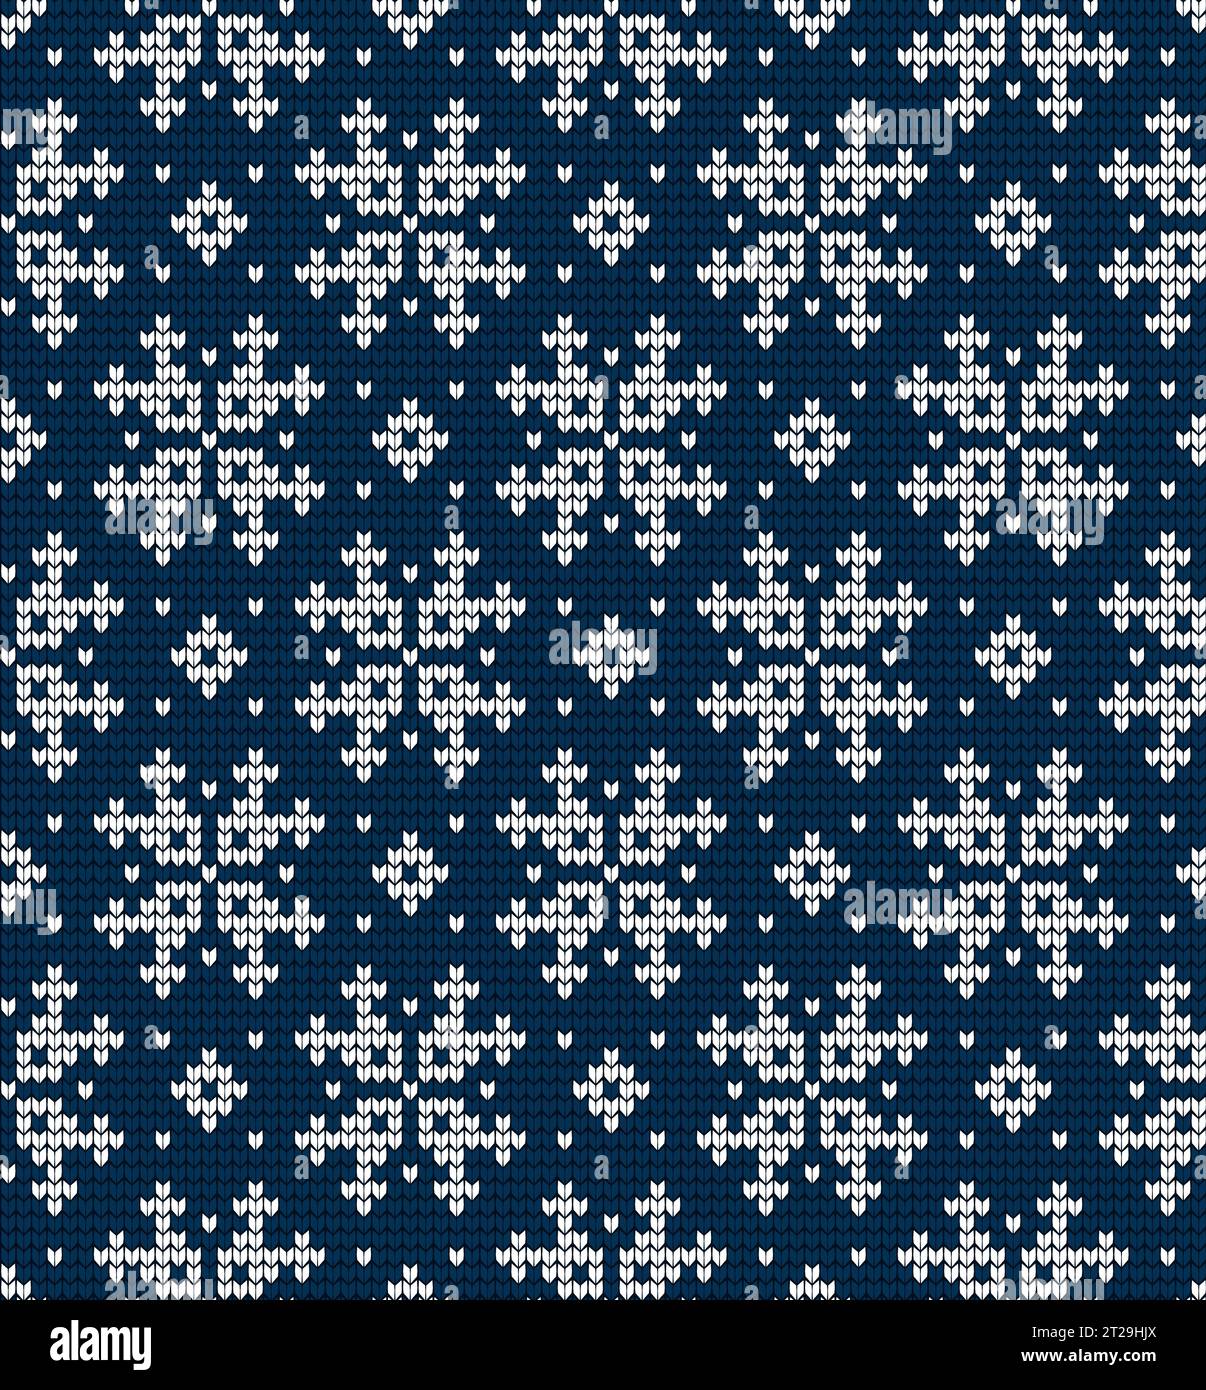 Knitted Christmas and New Year pattern Stock Vector